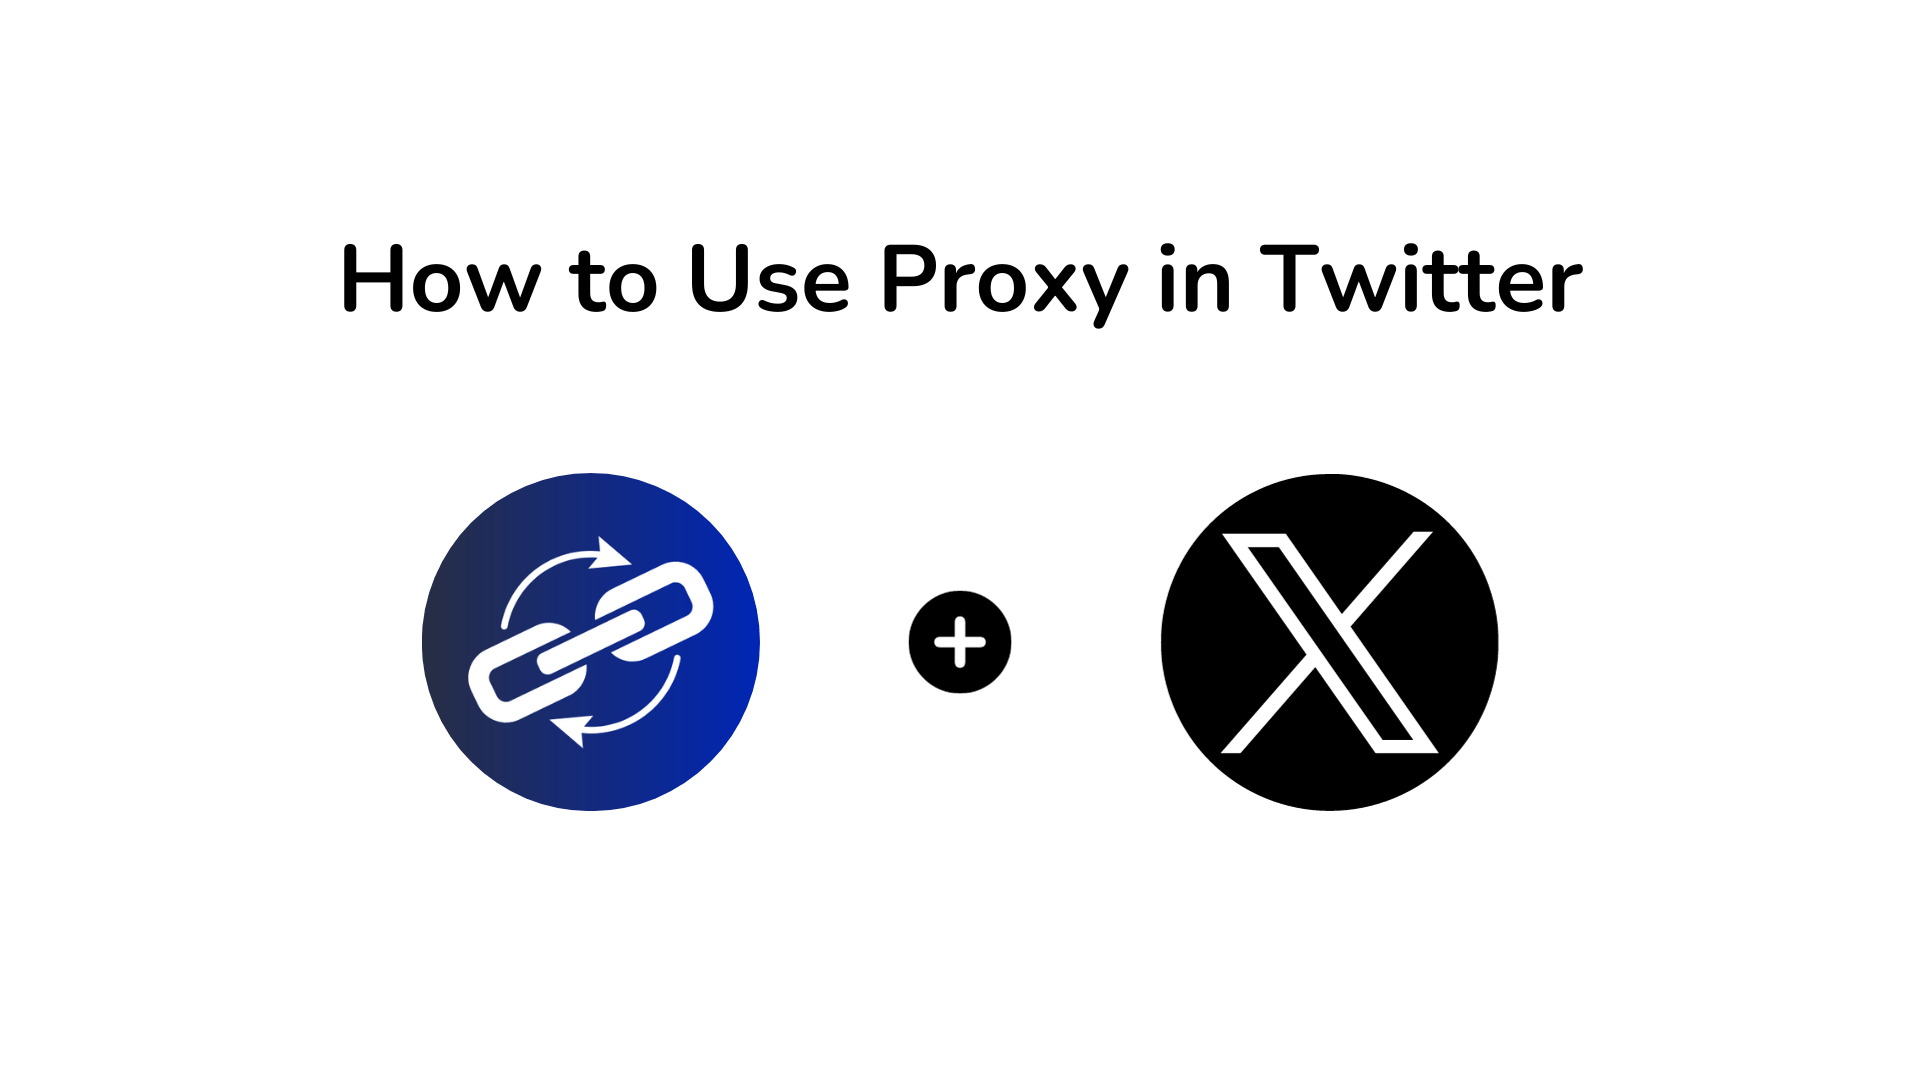 How to Use Proxy in Twitter